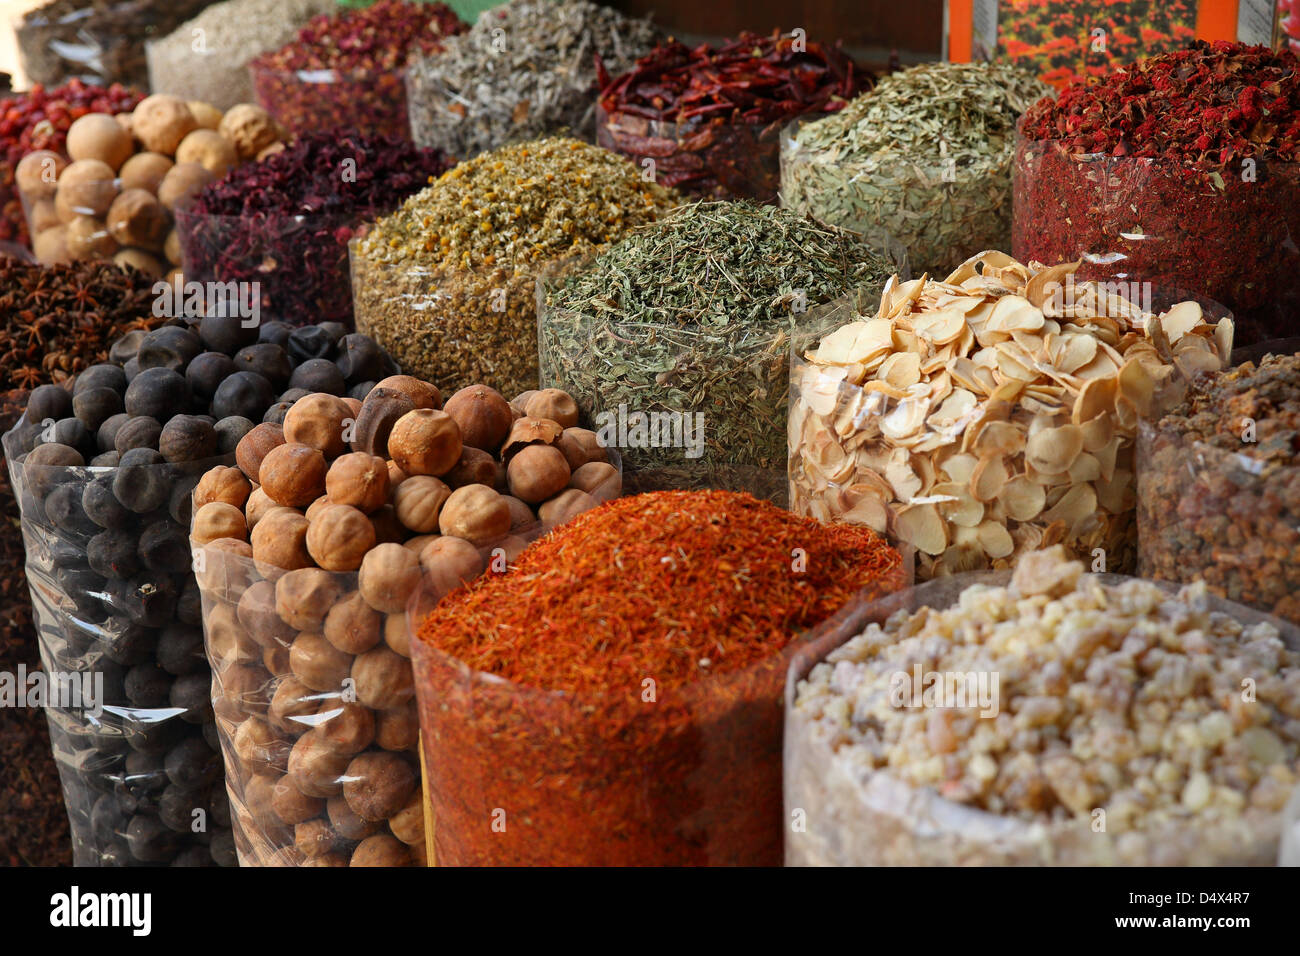 Bags of colorful spices at souk market in Dubai, United Arab Emirates Stock Photo